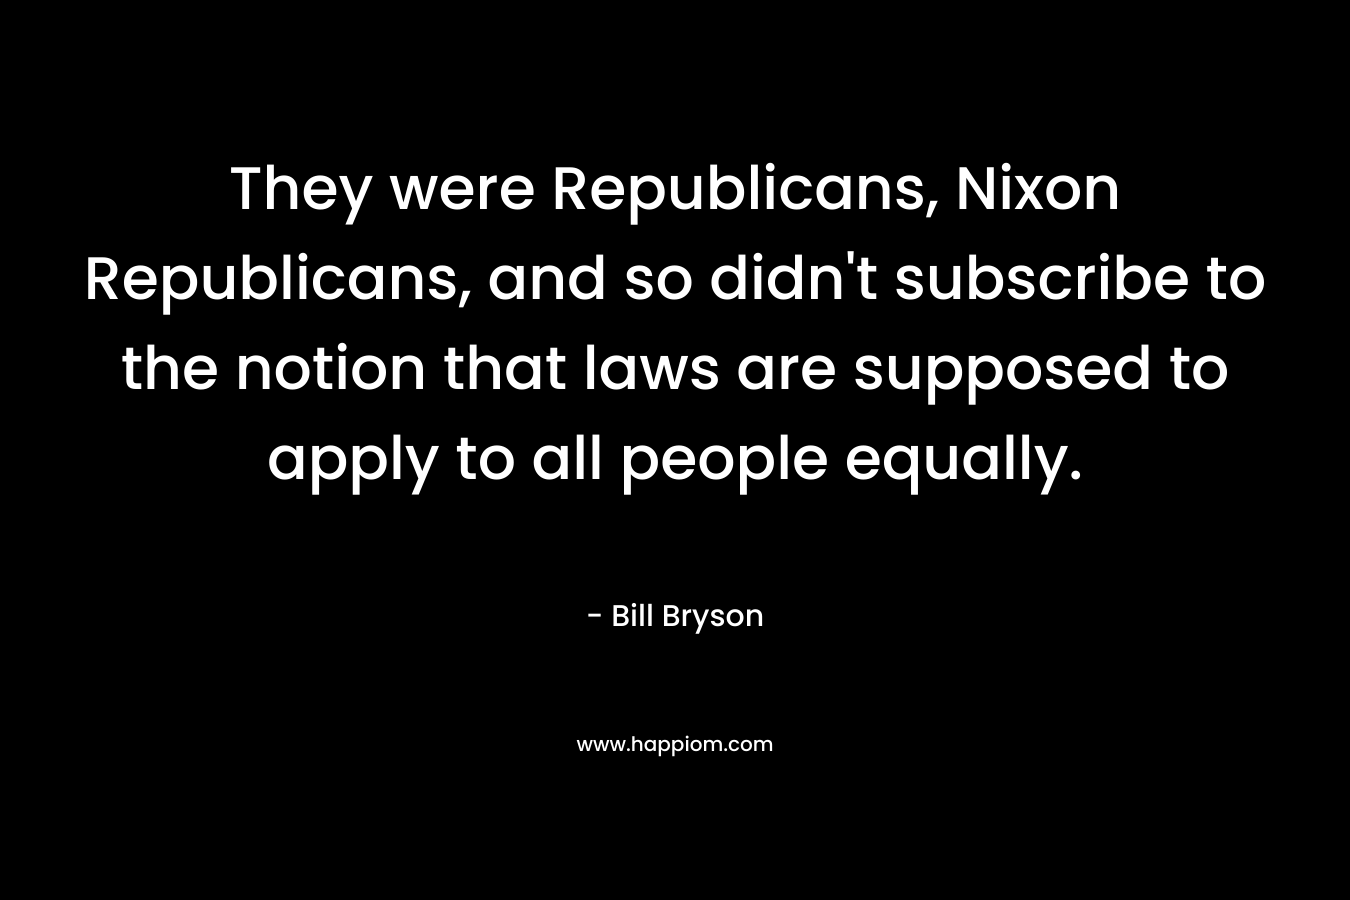 They were Republicans, Nixon Republicans, and so didn’t subscribe to the notion that laws are supposed to apply to all people equally. – Bill Bryson